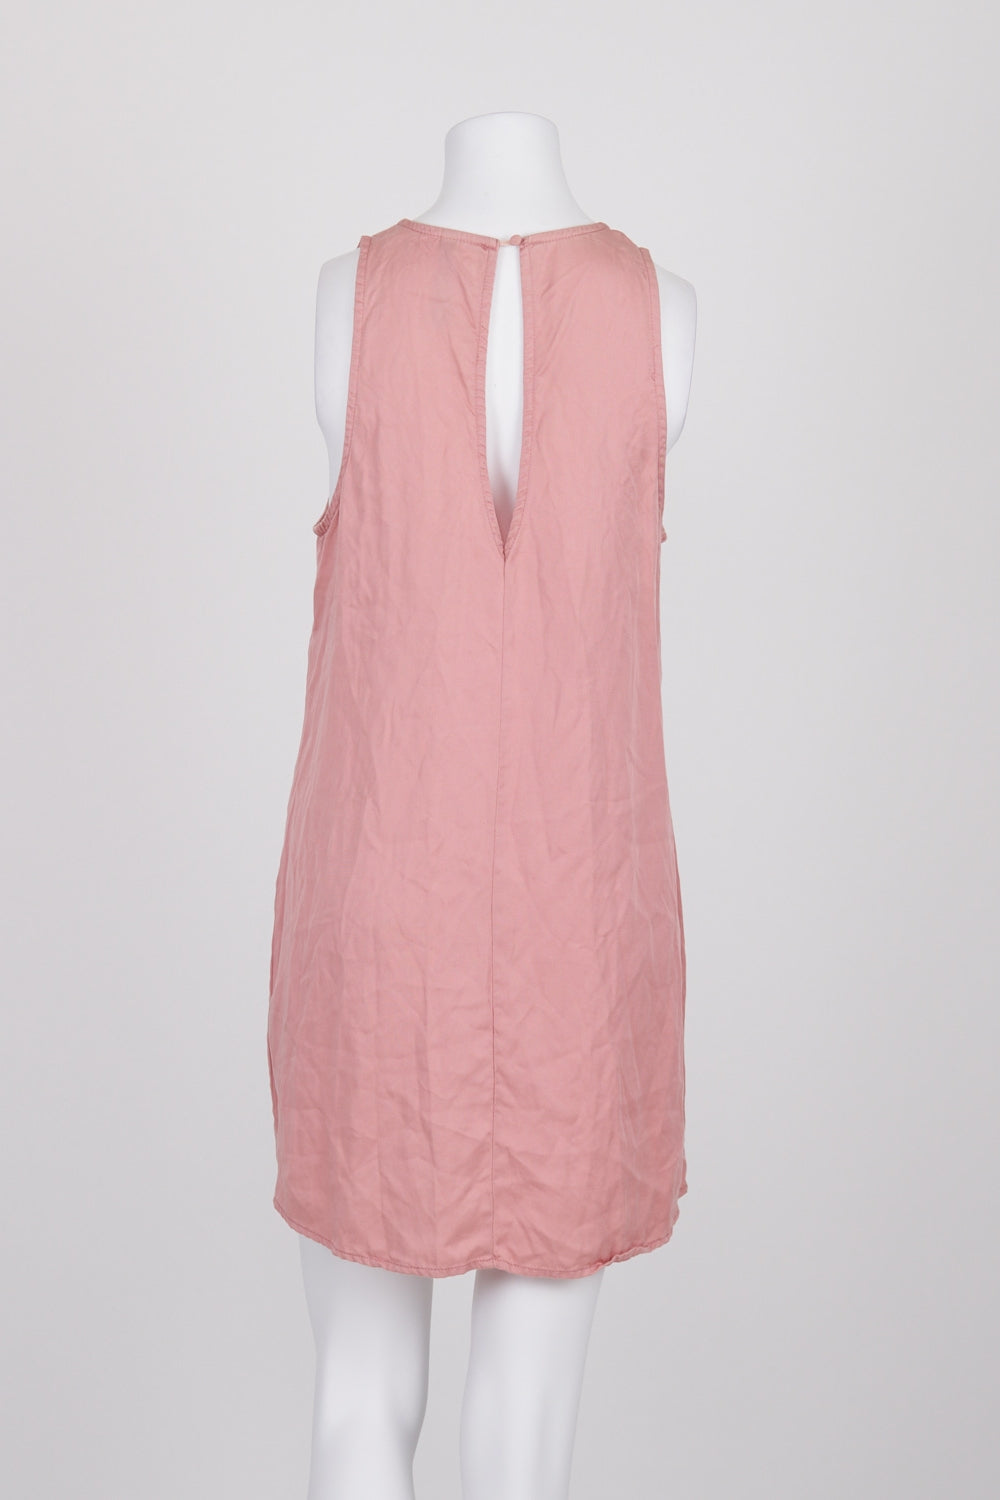 All About Eve Pink Sleeveless Dress 12